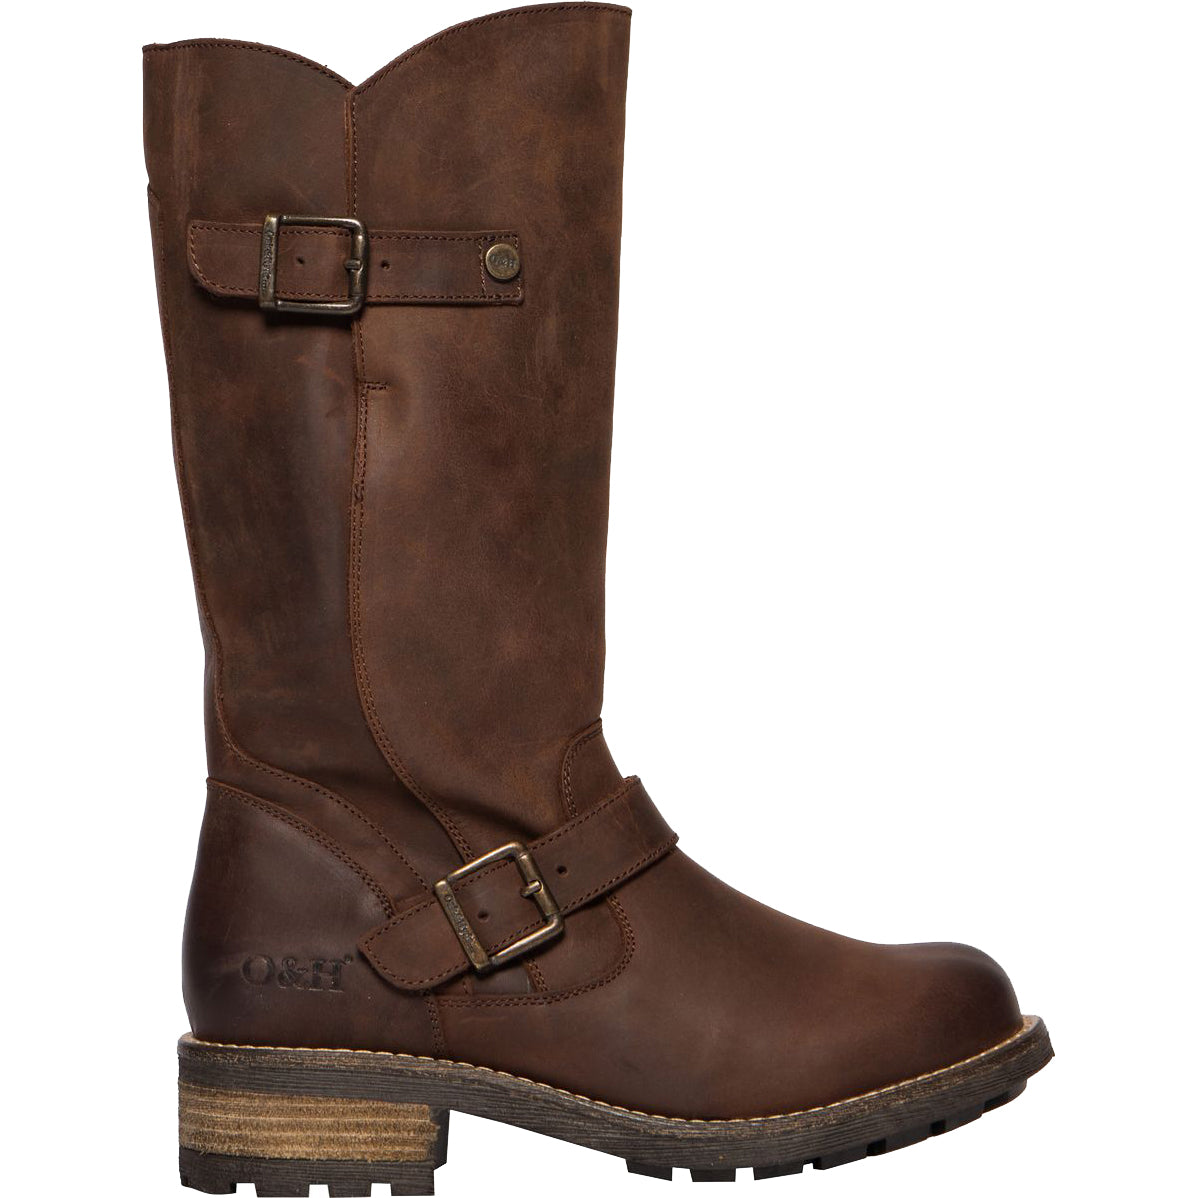 Crest Womens Tall Leather Boots - Brown